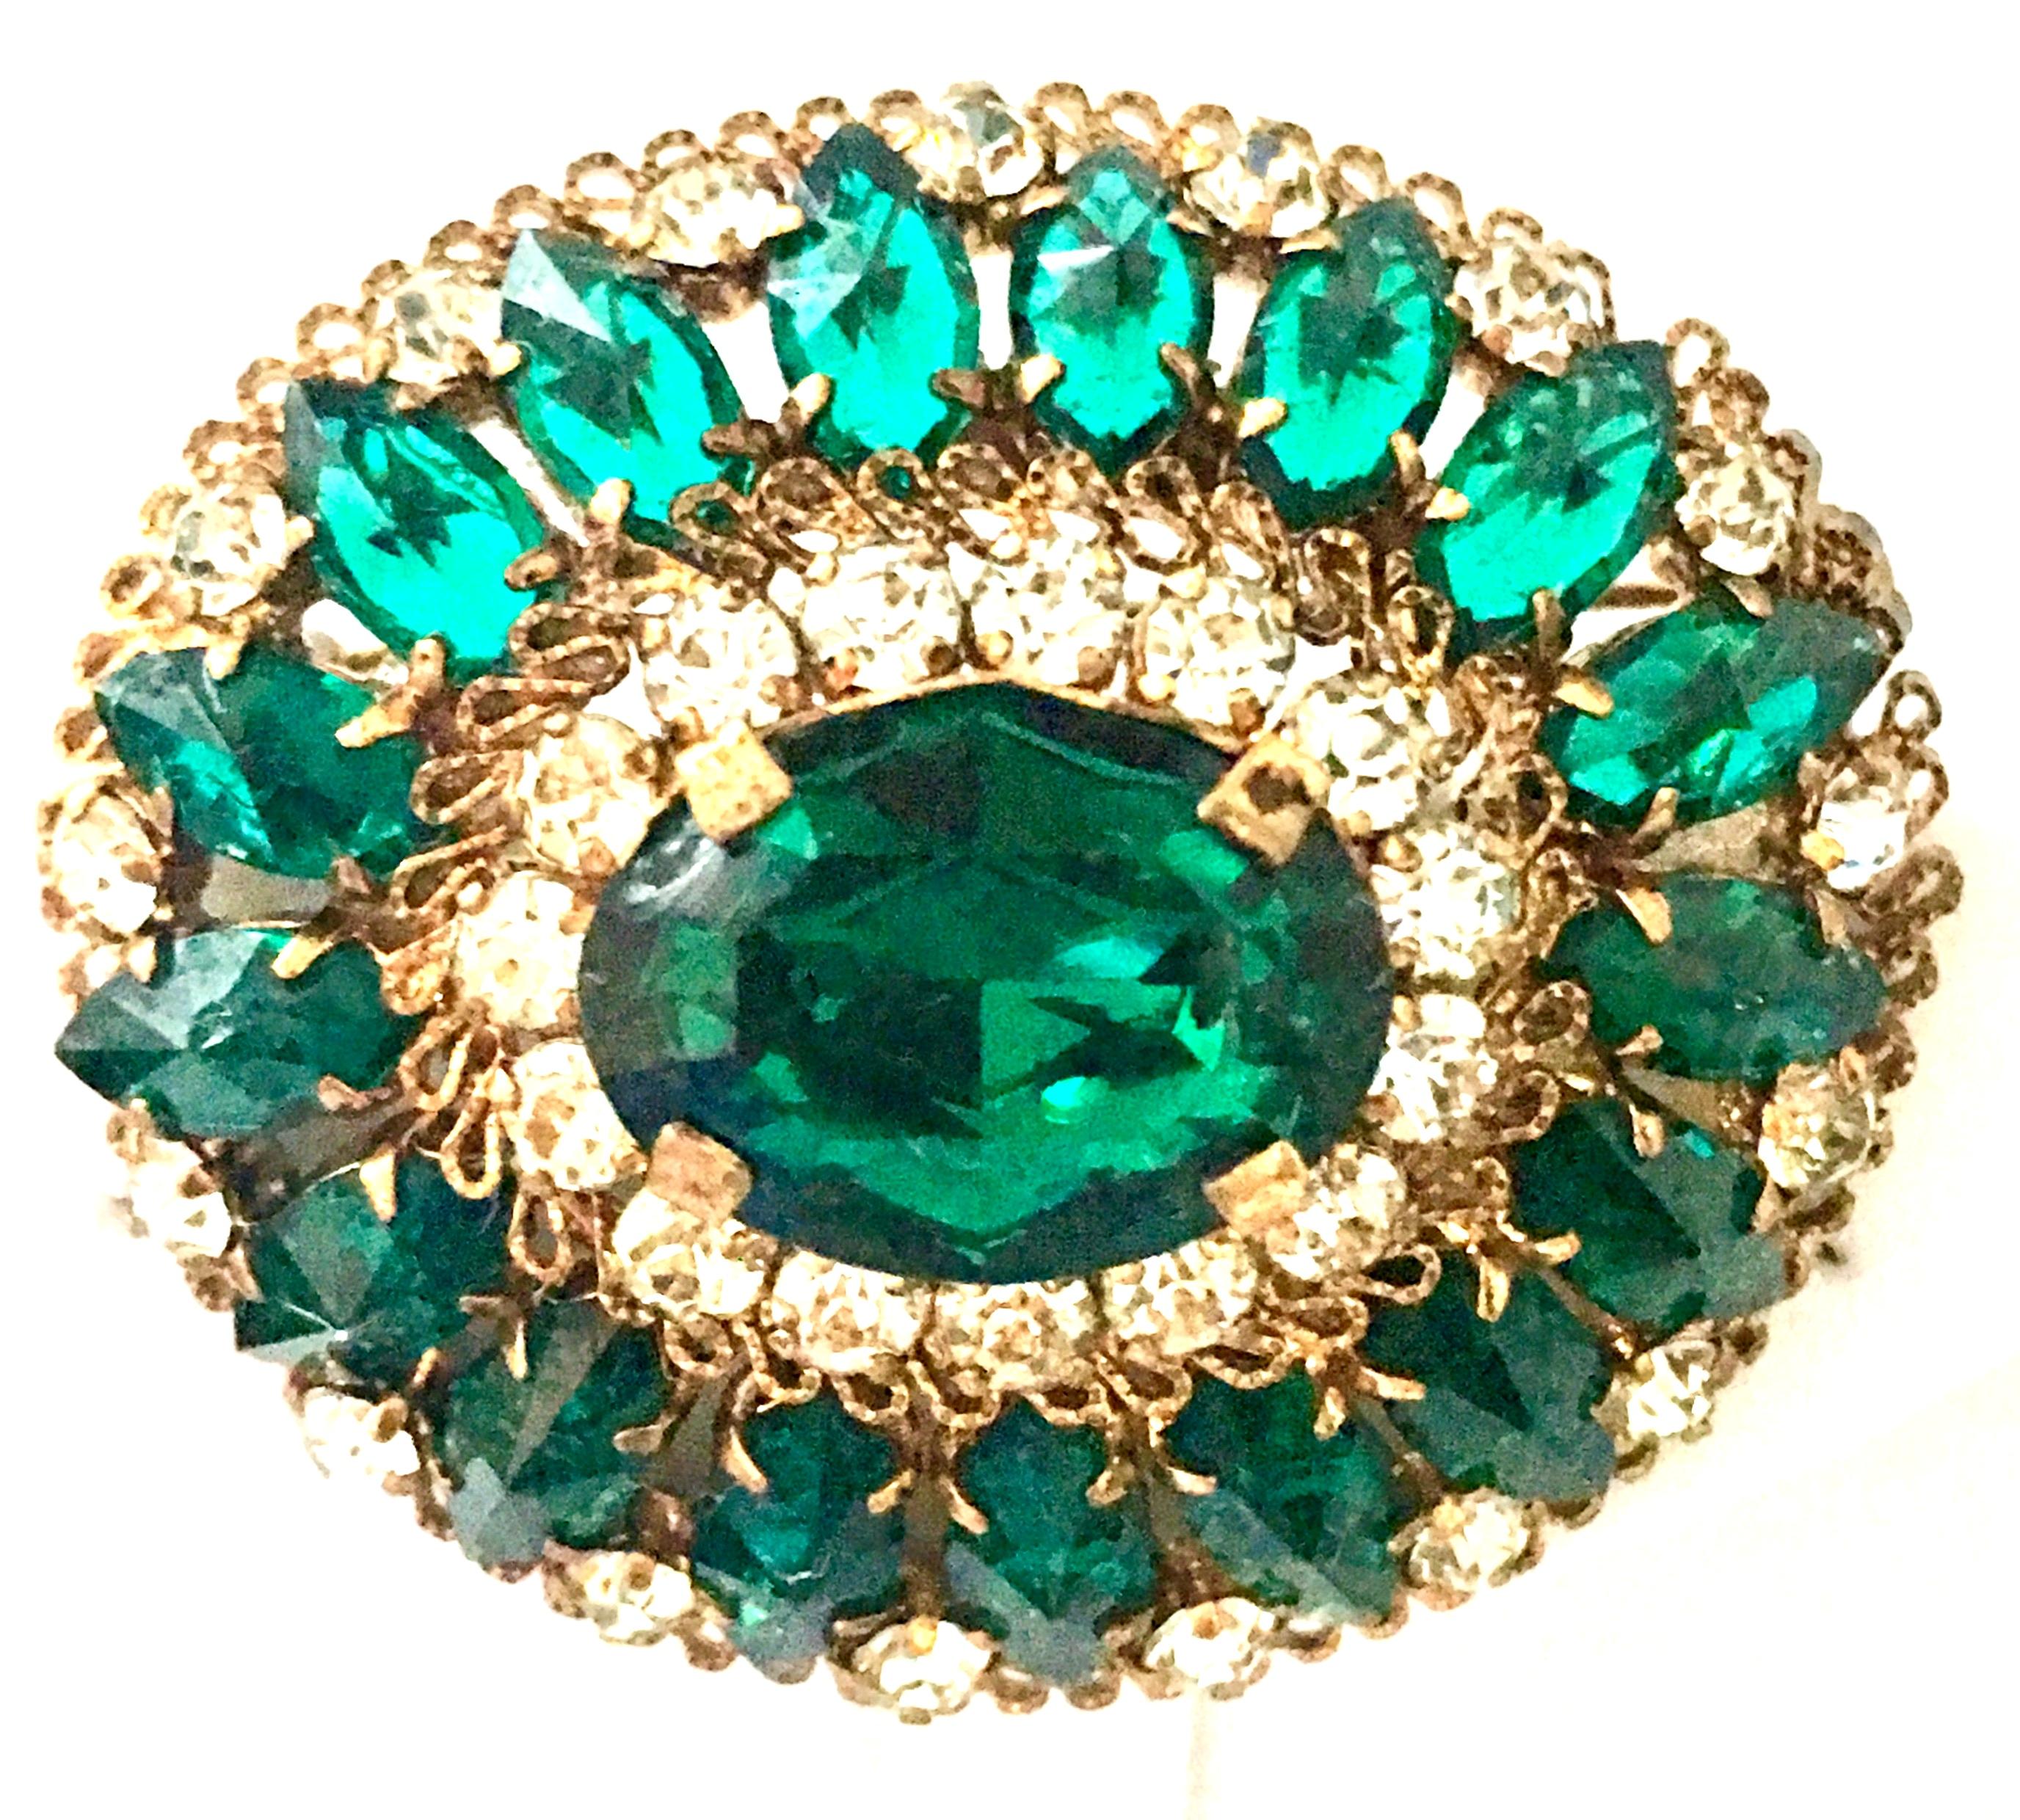 20th Century Gold Plate And Austrian Crystal Oval Dome Brooch-Signed. This fantastic piece is executed with gold plate prong set brilliant cut and faceted emerald green and crystal clear Austrian crystal stones. Features the finest quality in